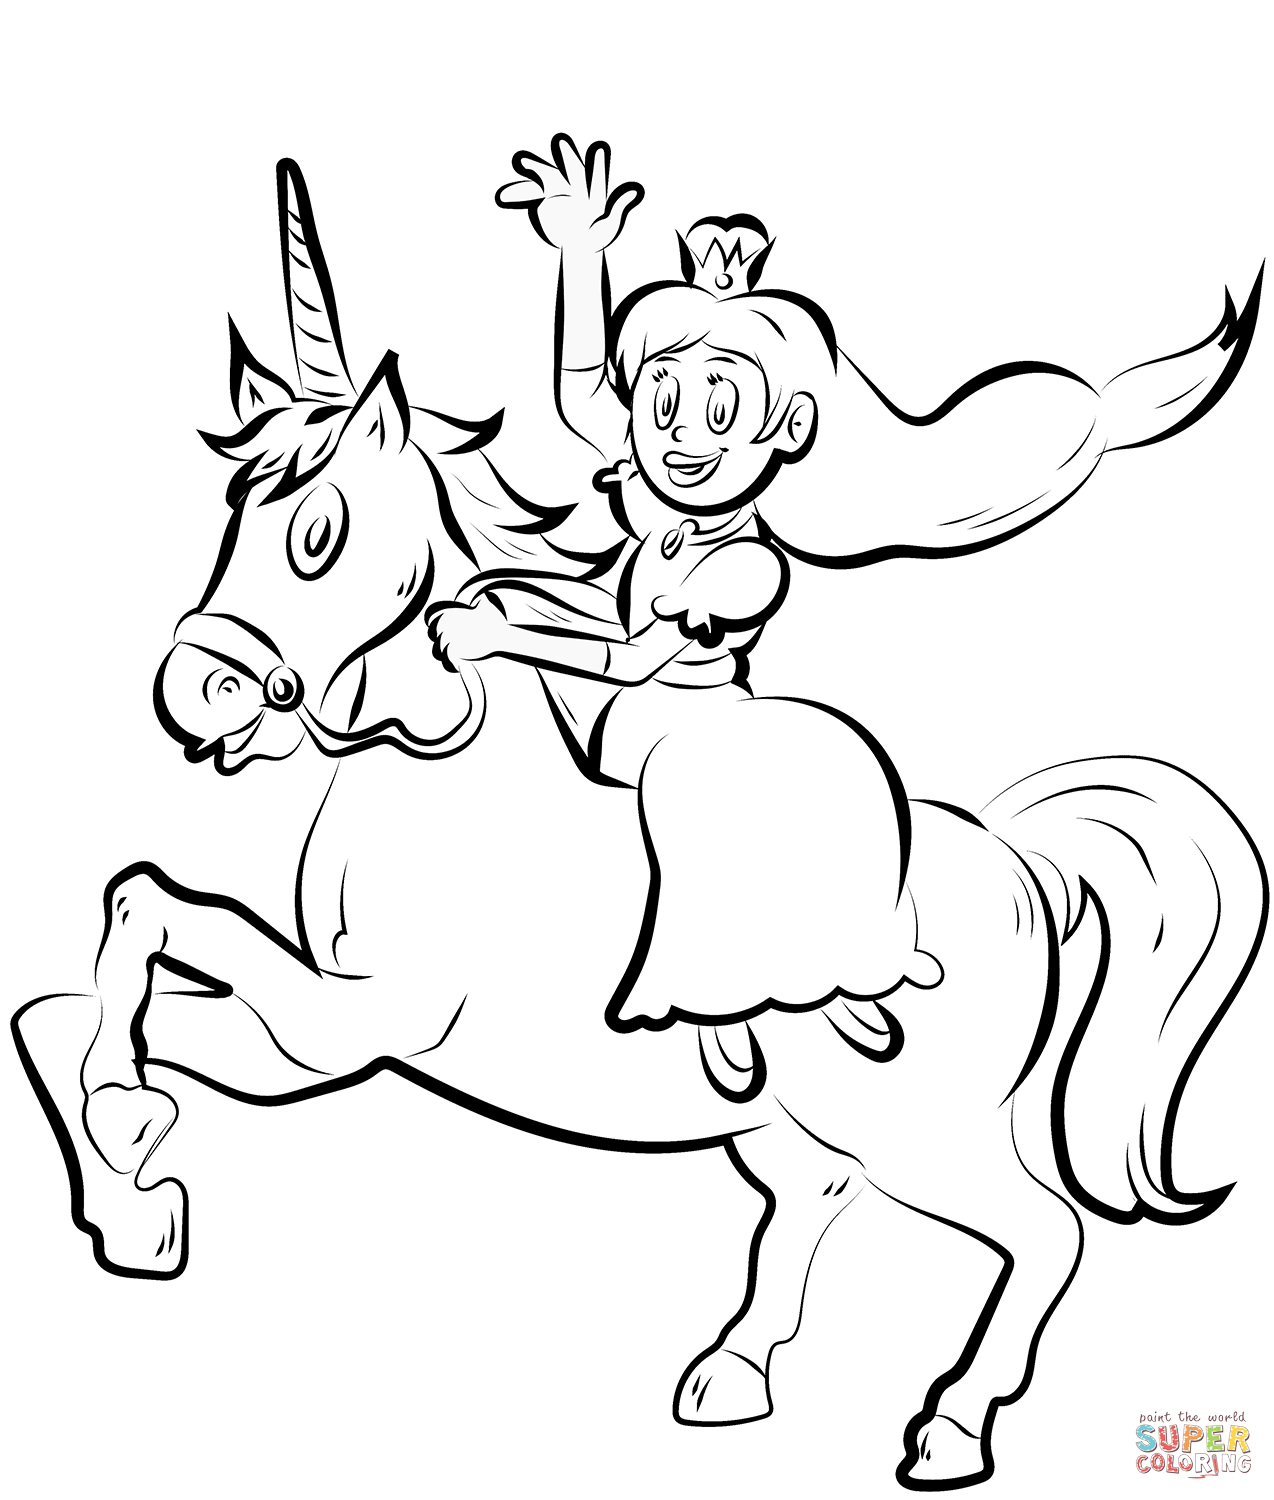 Princess rides unicorn coloring page free printable coloring pages